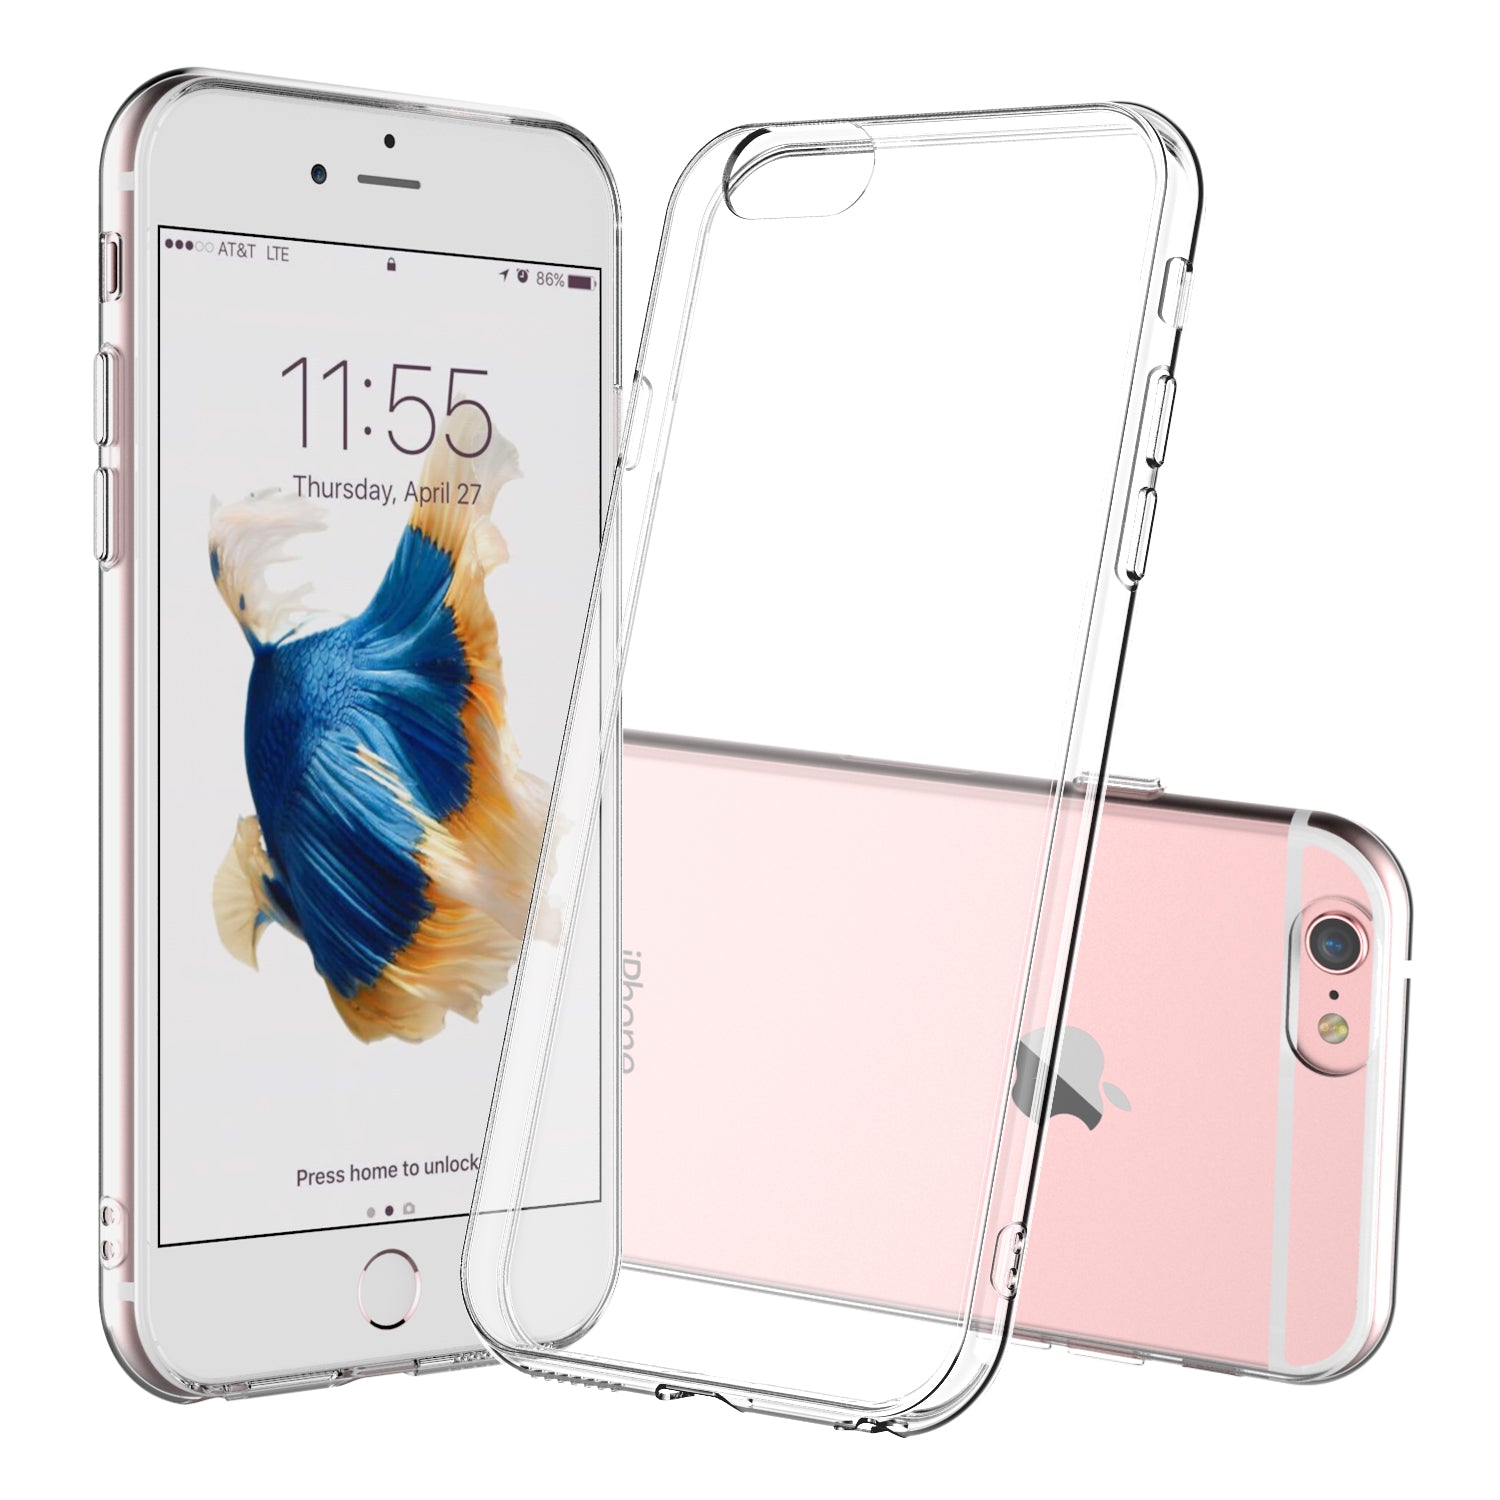 3 Top Selling Designs for iPhone 6 Cover Cases